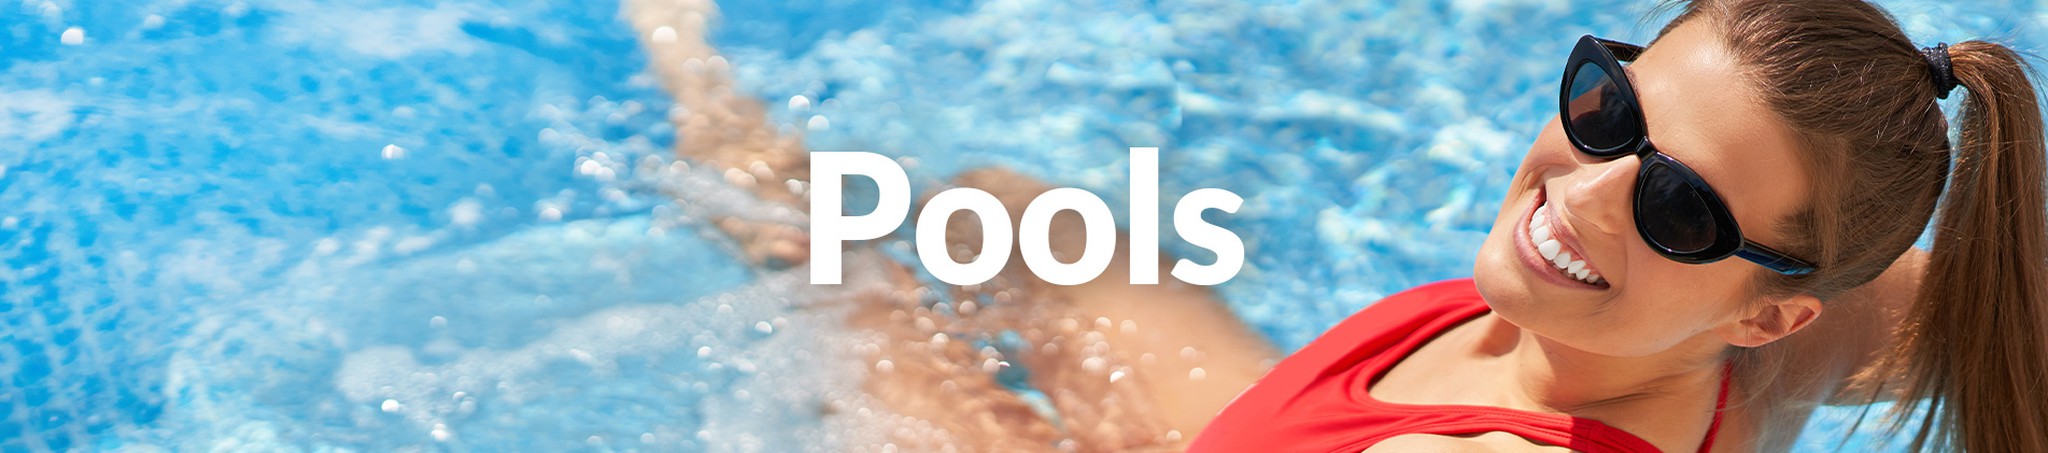 Great discounts on pools and accessories